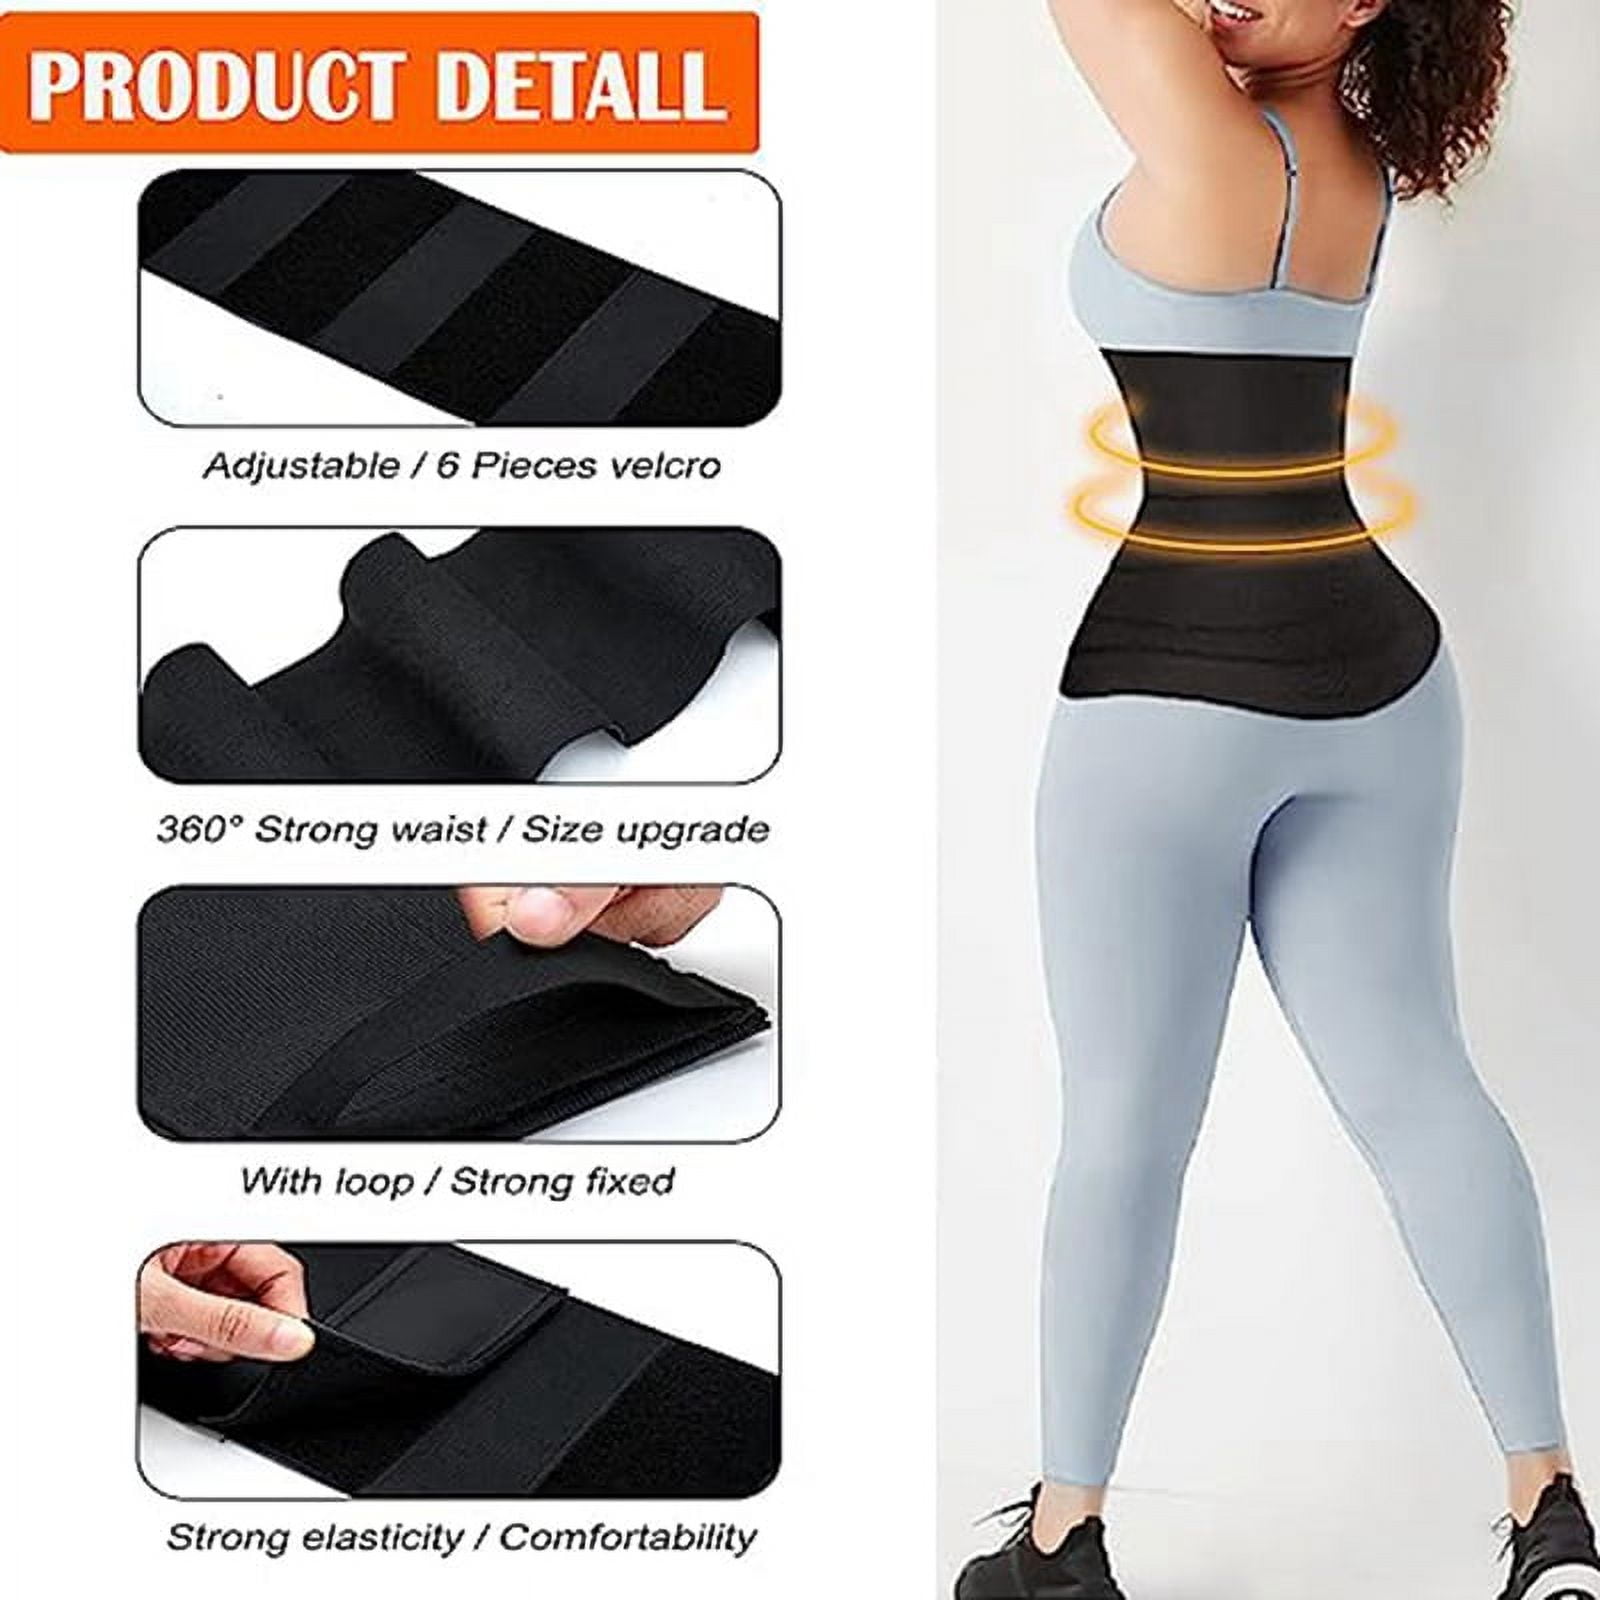  ellostar Women's Waist Trainer: Sweat Band for Belly Fat, Tummy  Control, Back Support, Workout Shapewear, Weight Loss Aid Small, Blue :  Sports & Outdoors